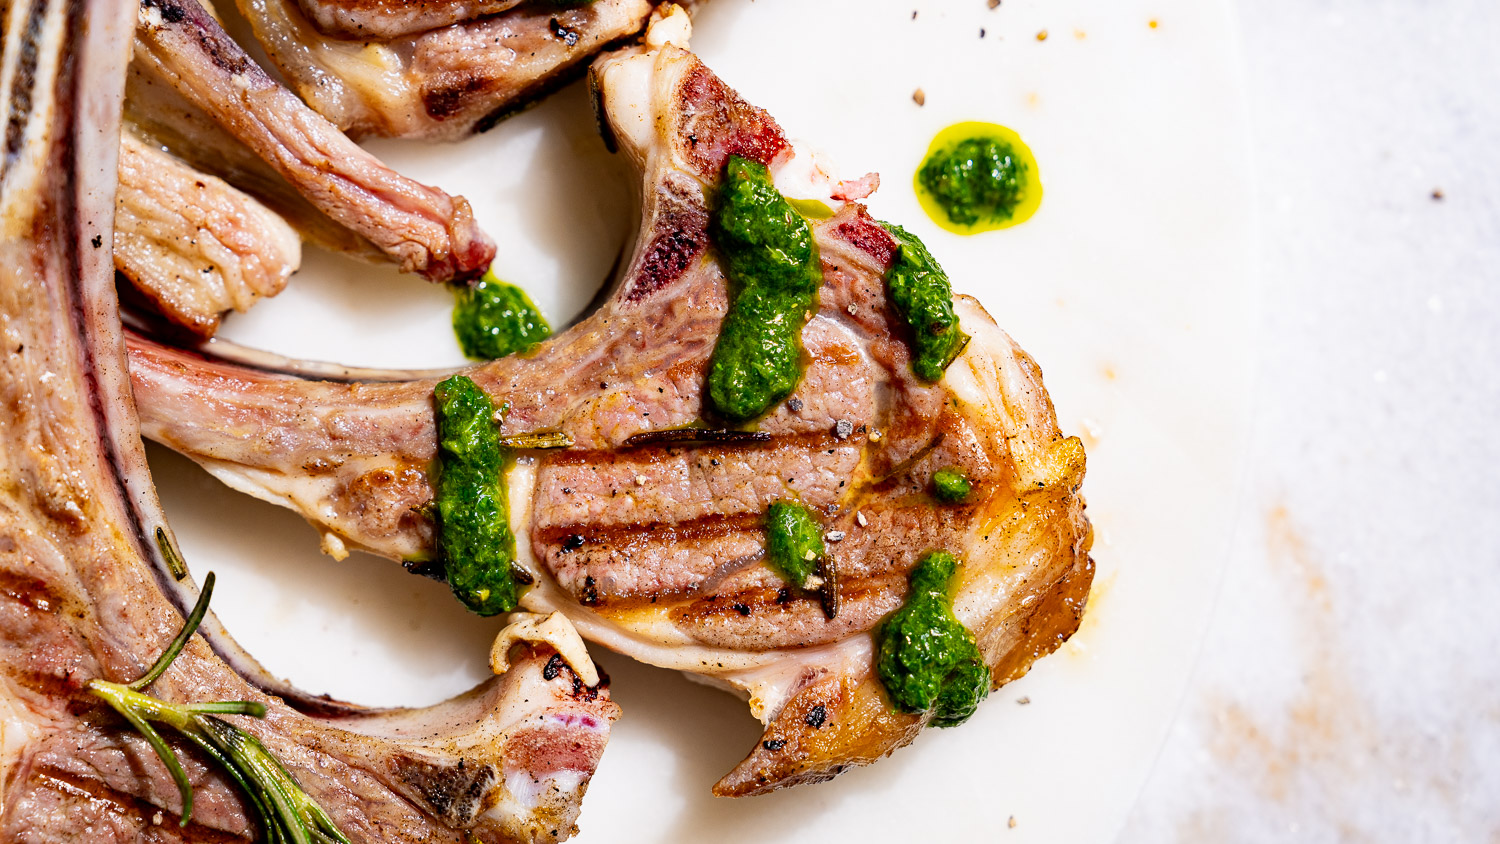 Juicy grilled lamb chops with coriander-chili sauce